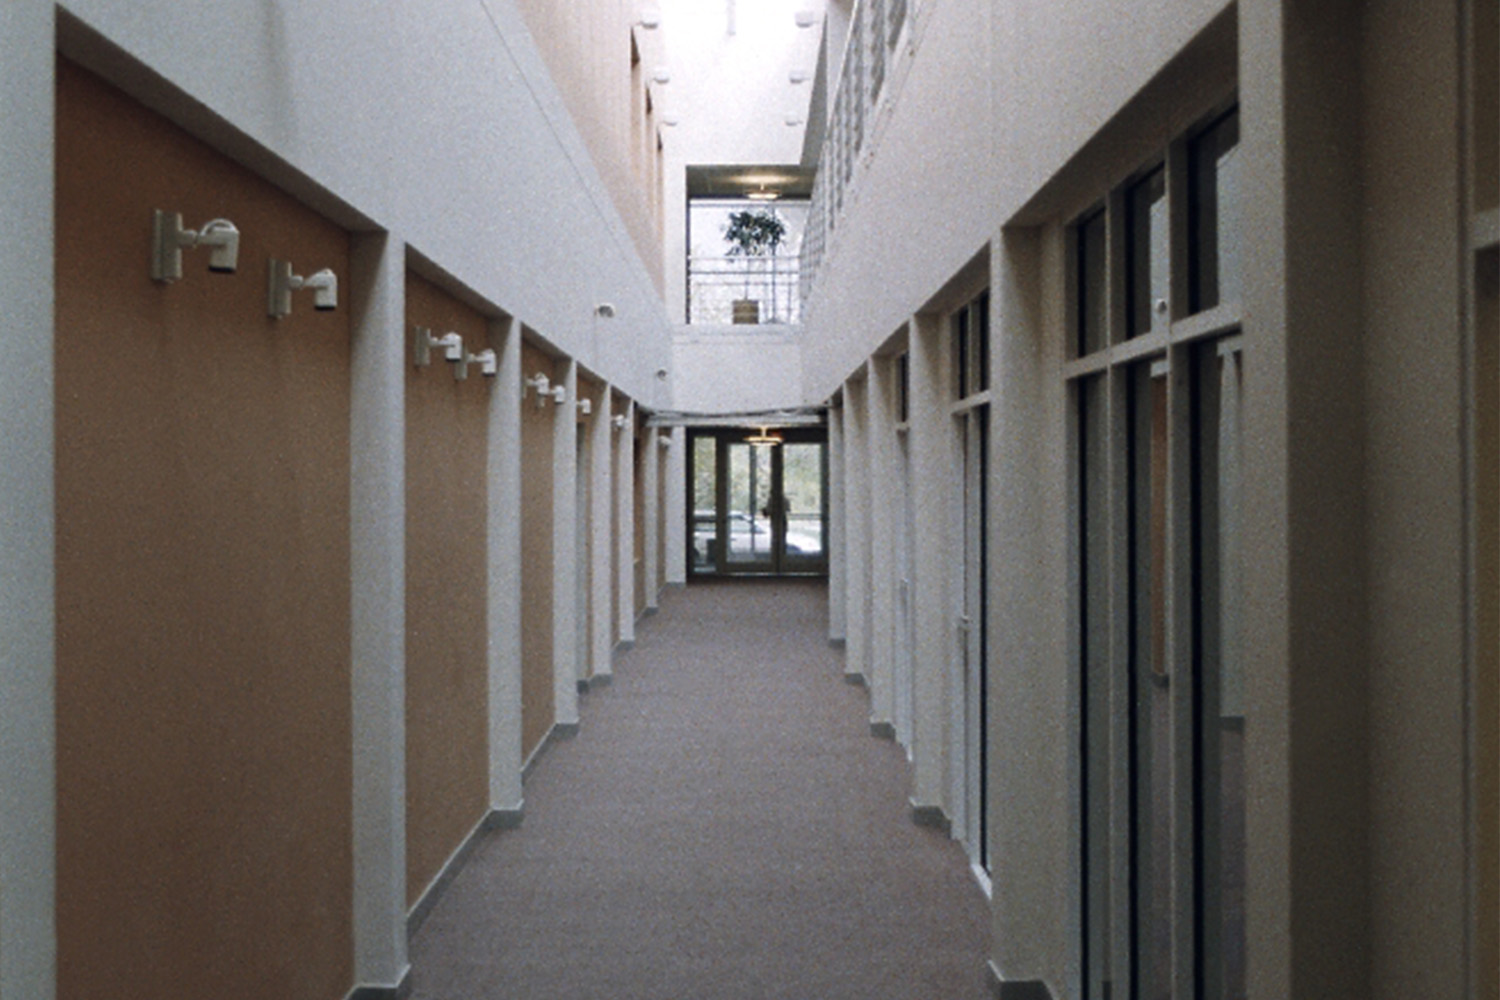 Hallway with building exist at the end, and multiple doors to the left and right 